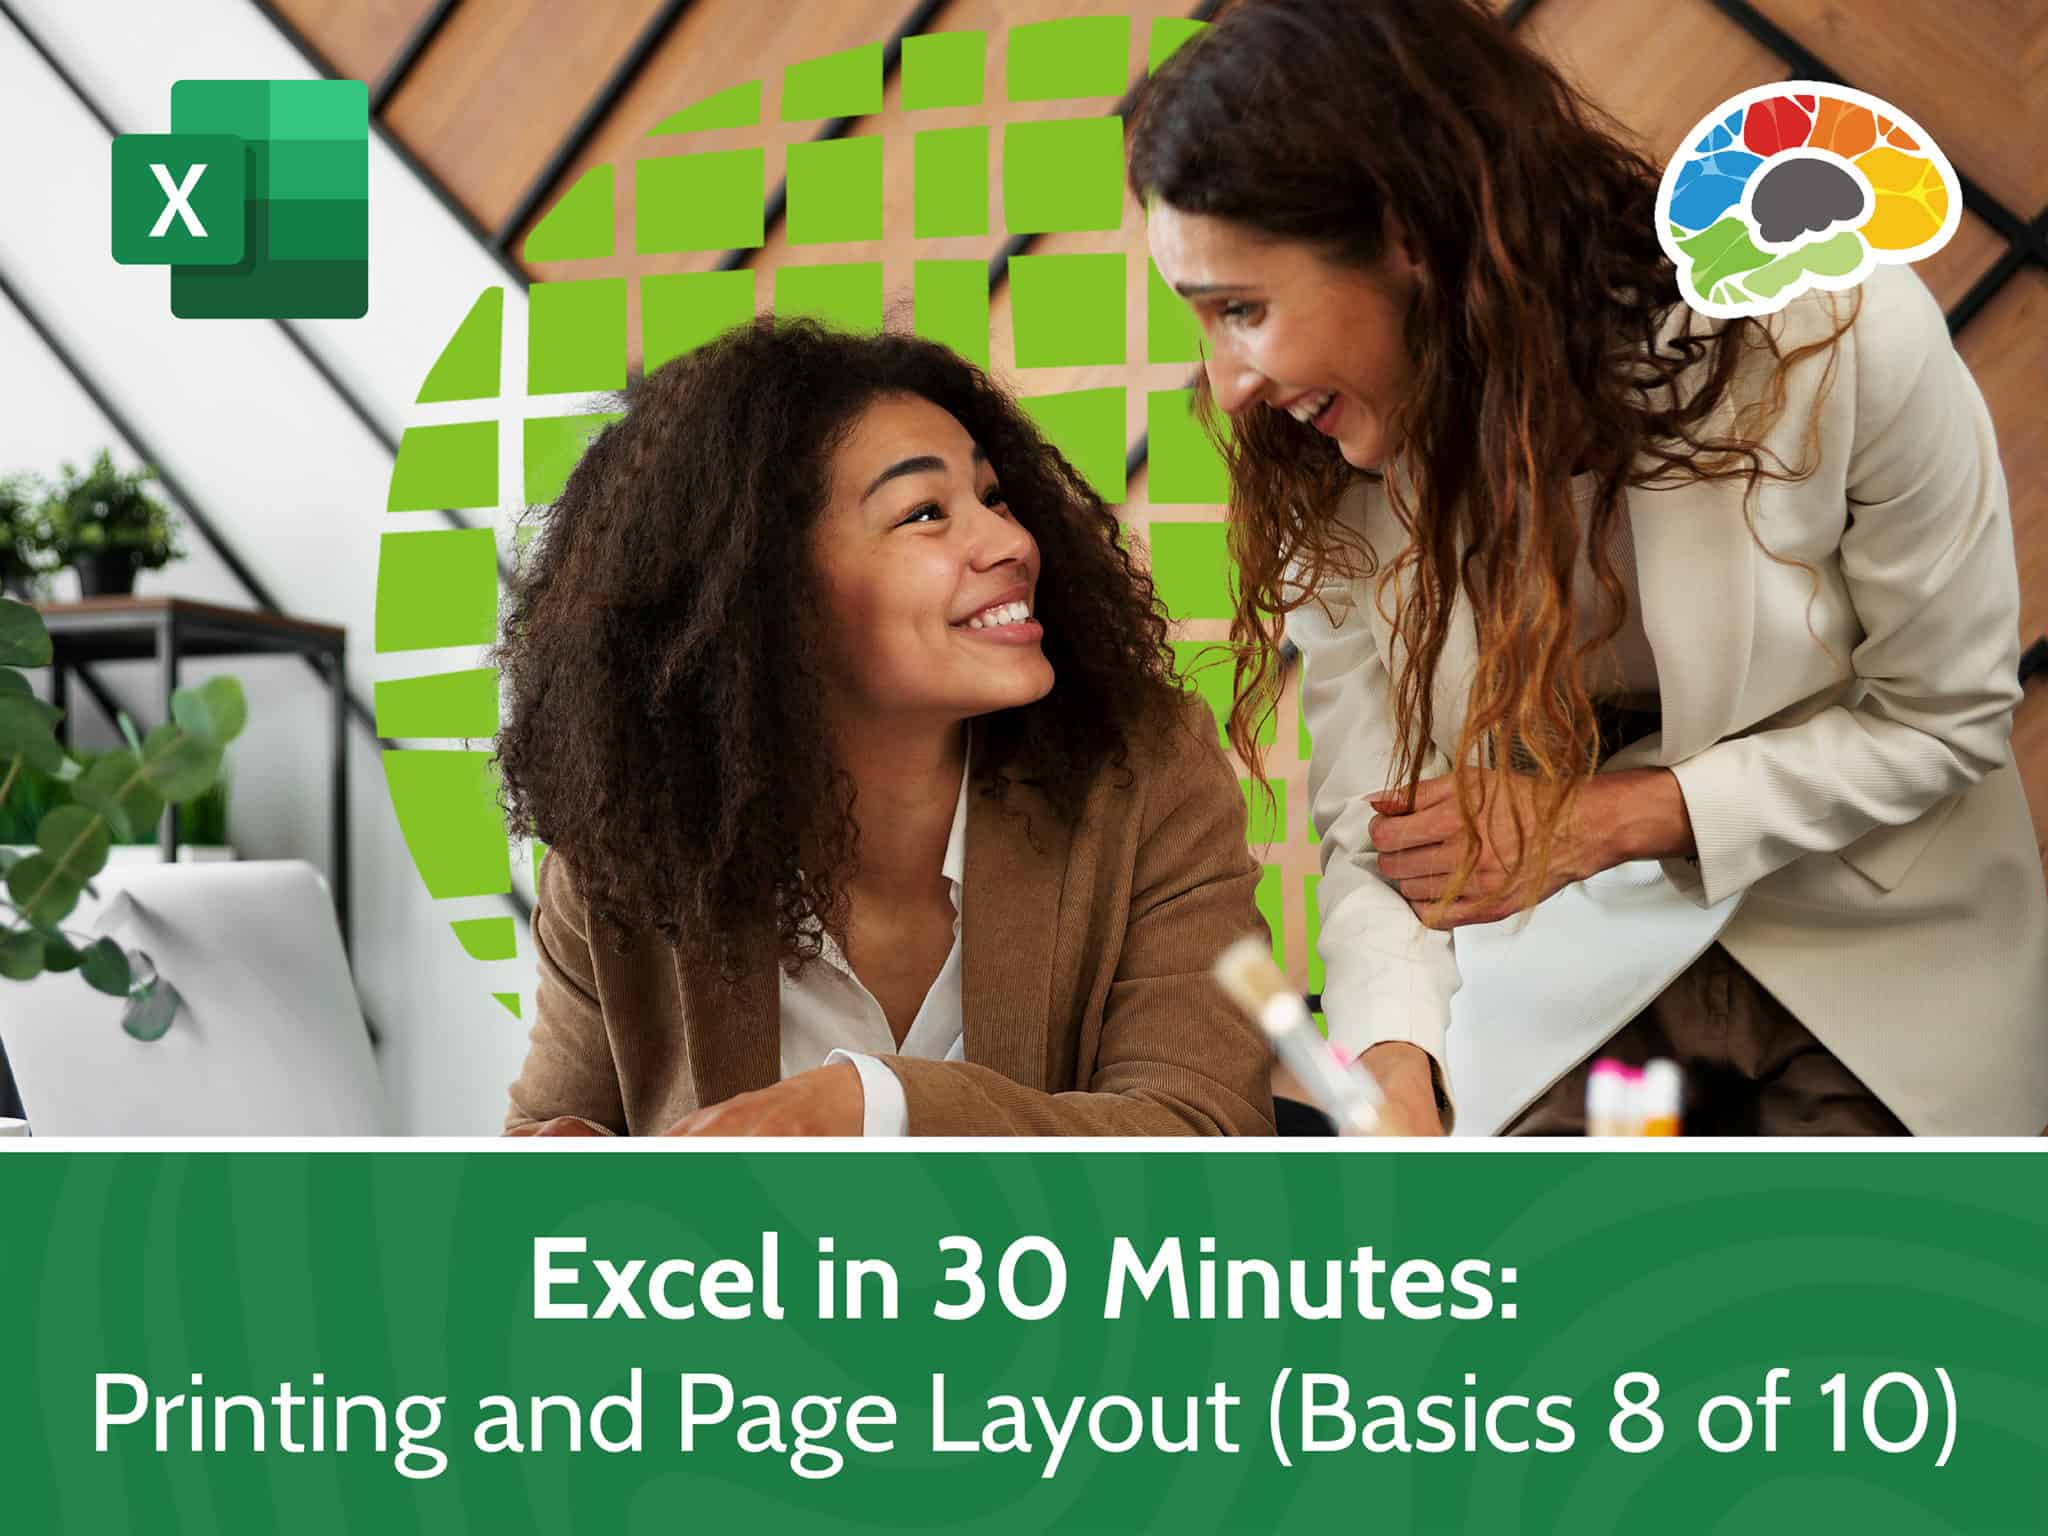 Excel in 30 Minutes Printing and Page Layout Basics 8 of 10 scaled